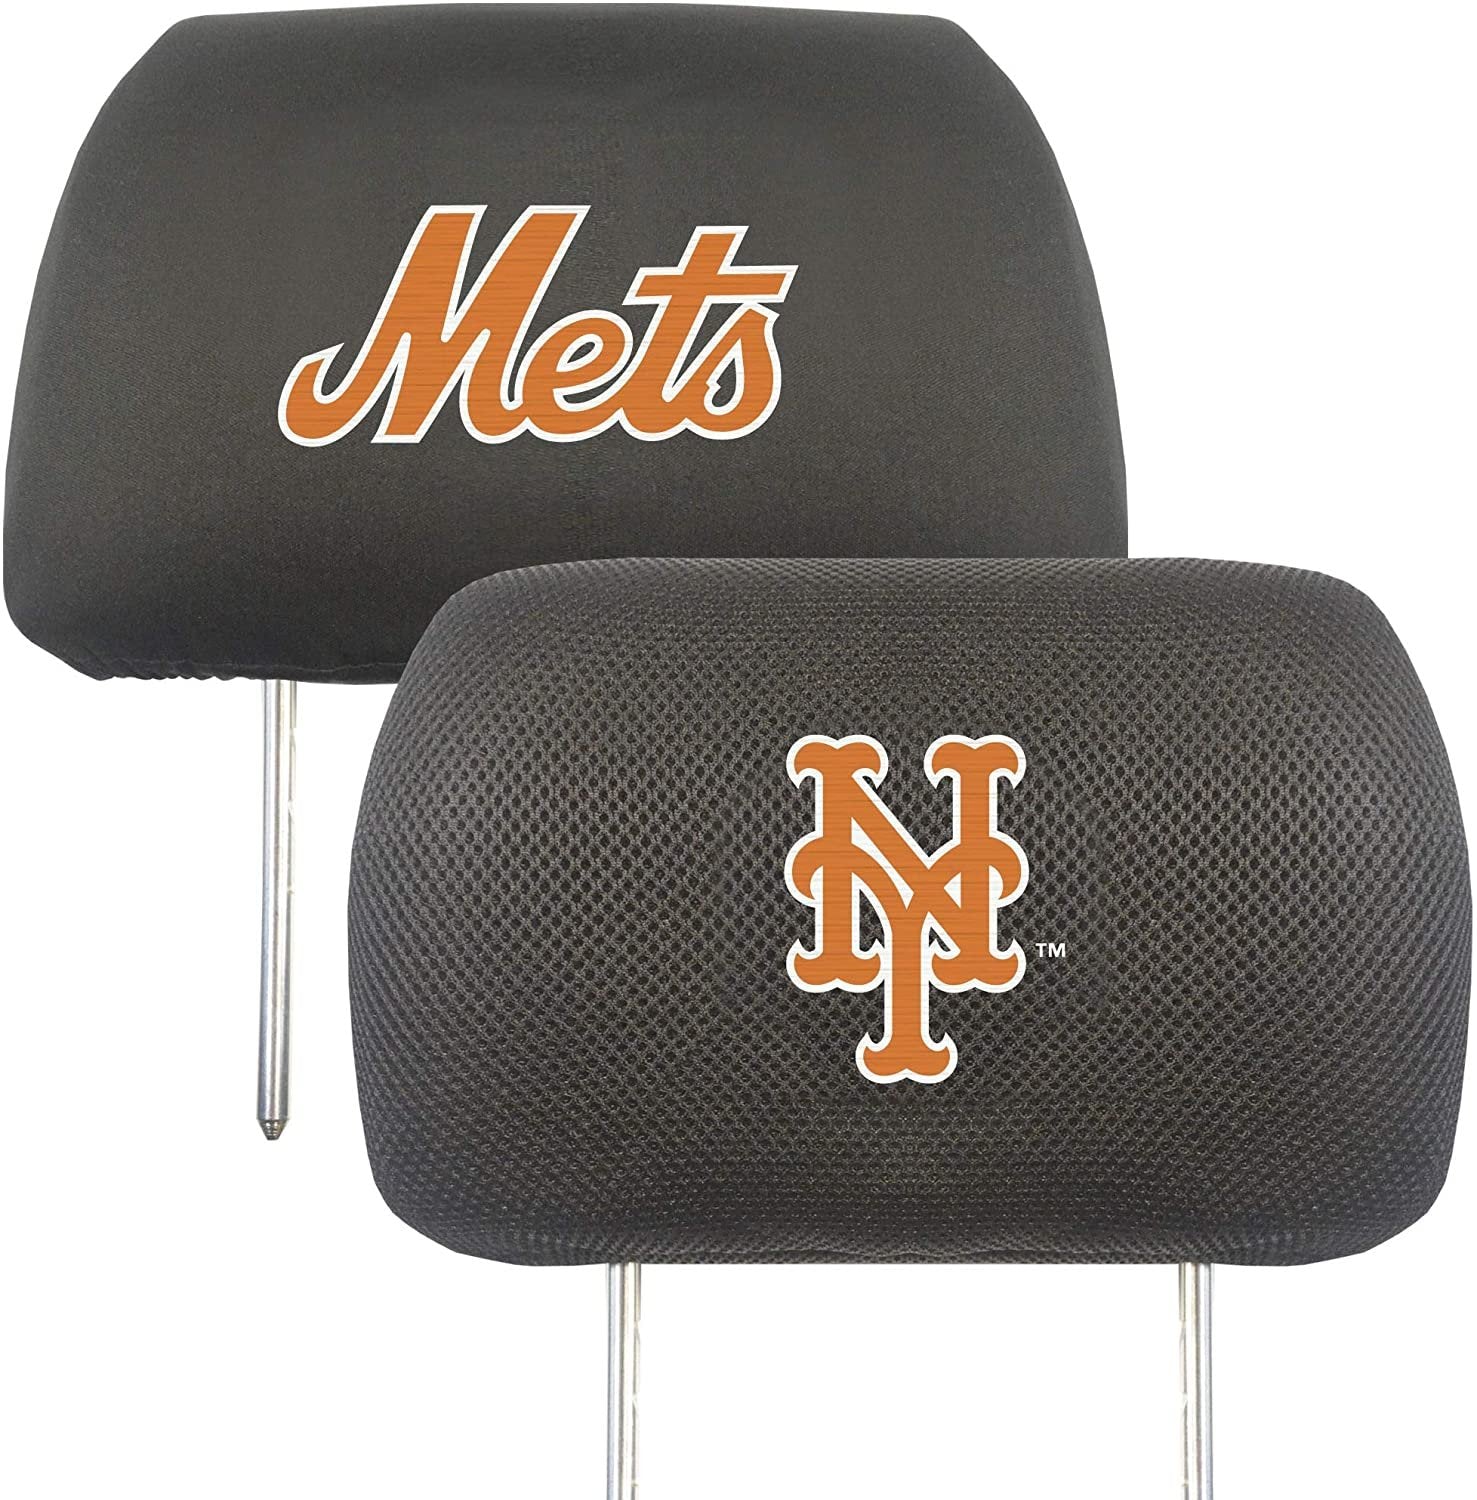 New York Mets Pair of Premium Auto Head Rest Covers, Embroidered, Black Elastic, 14x10 Inch